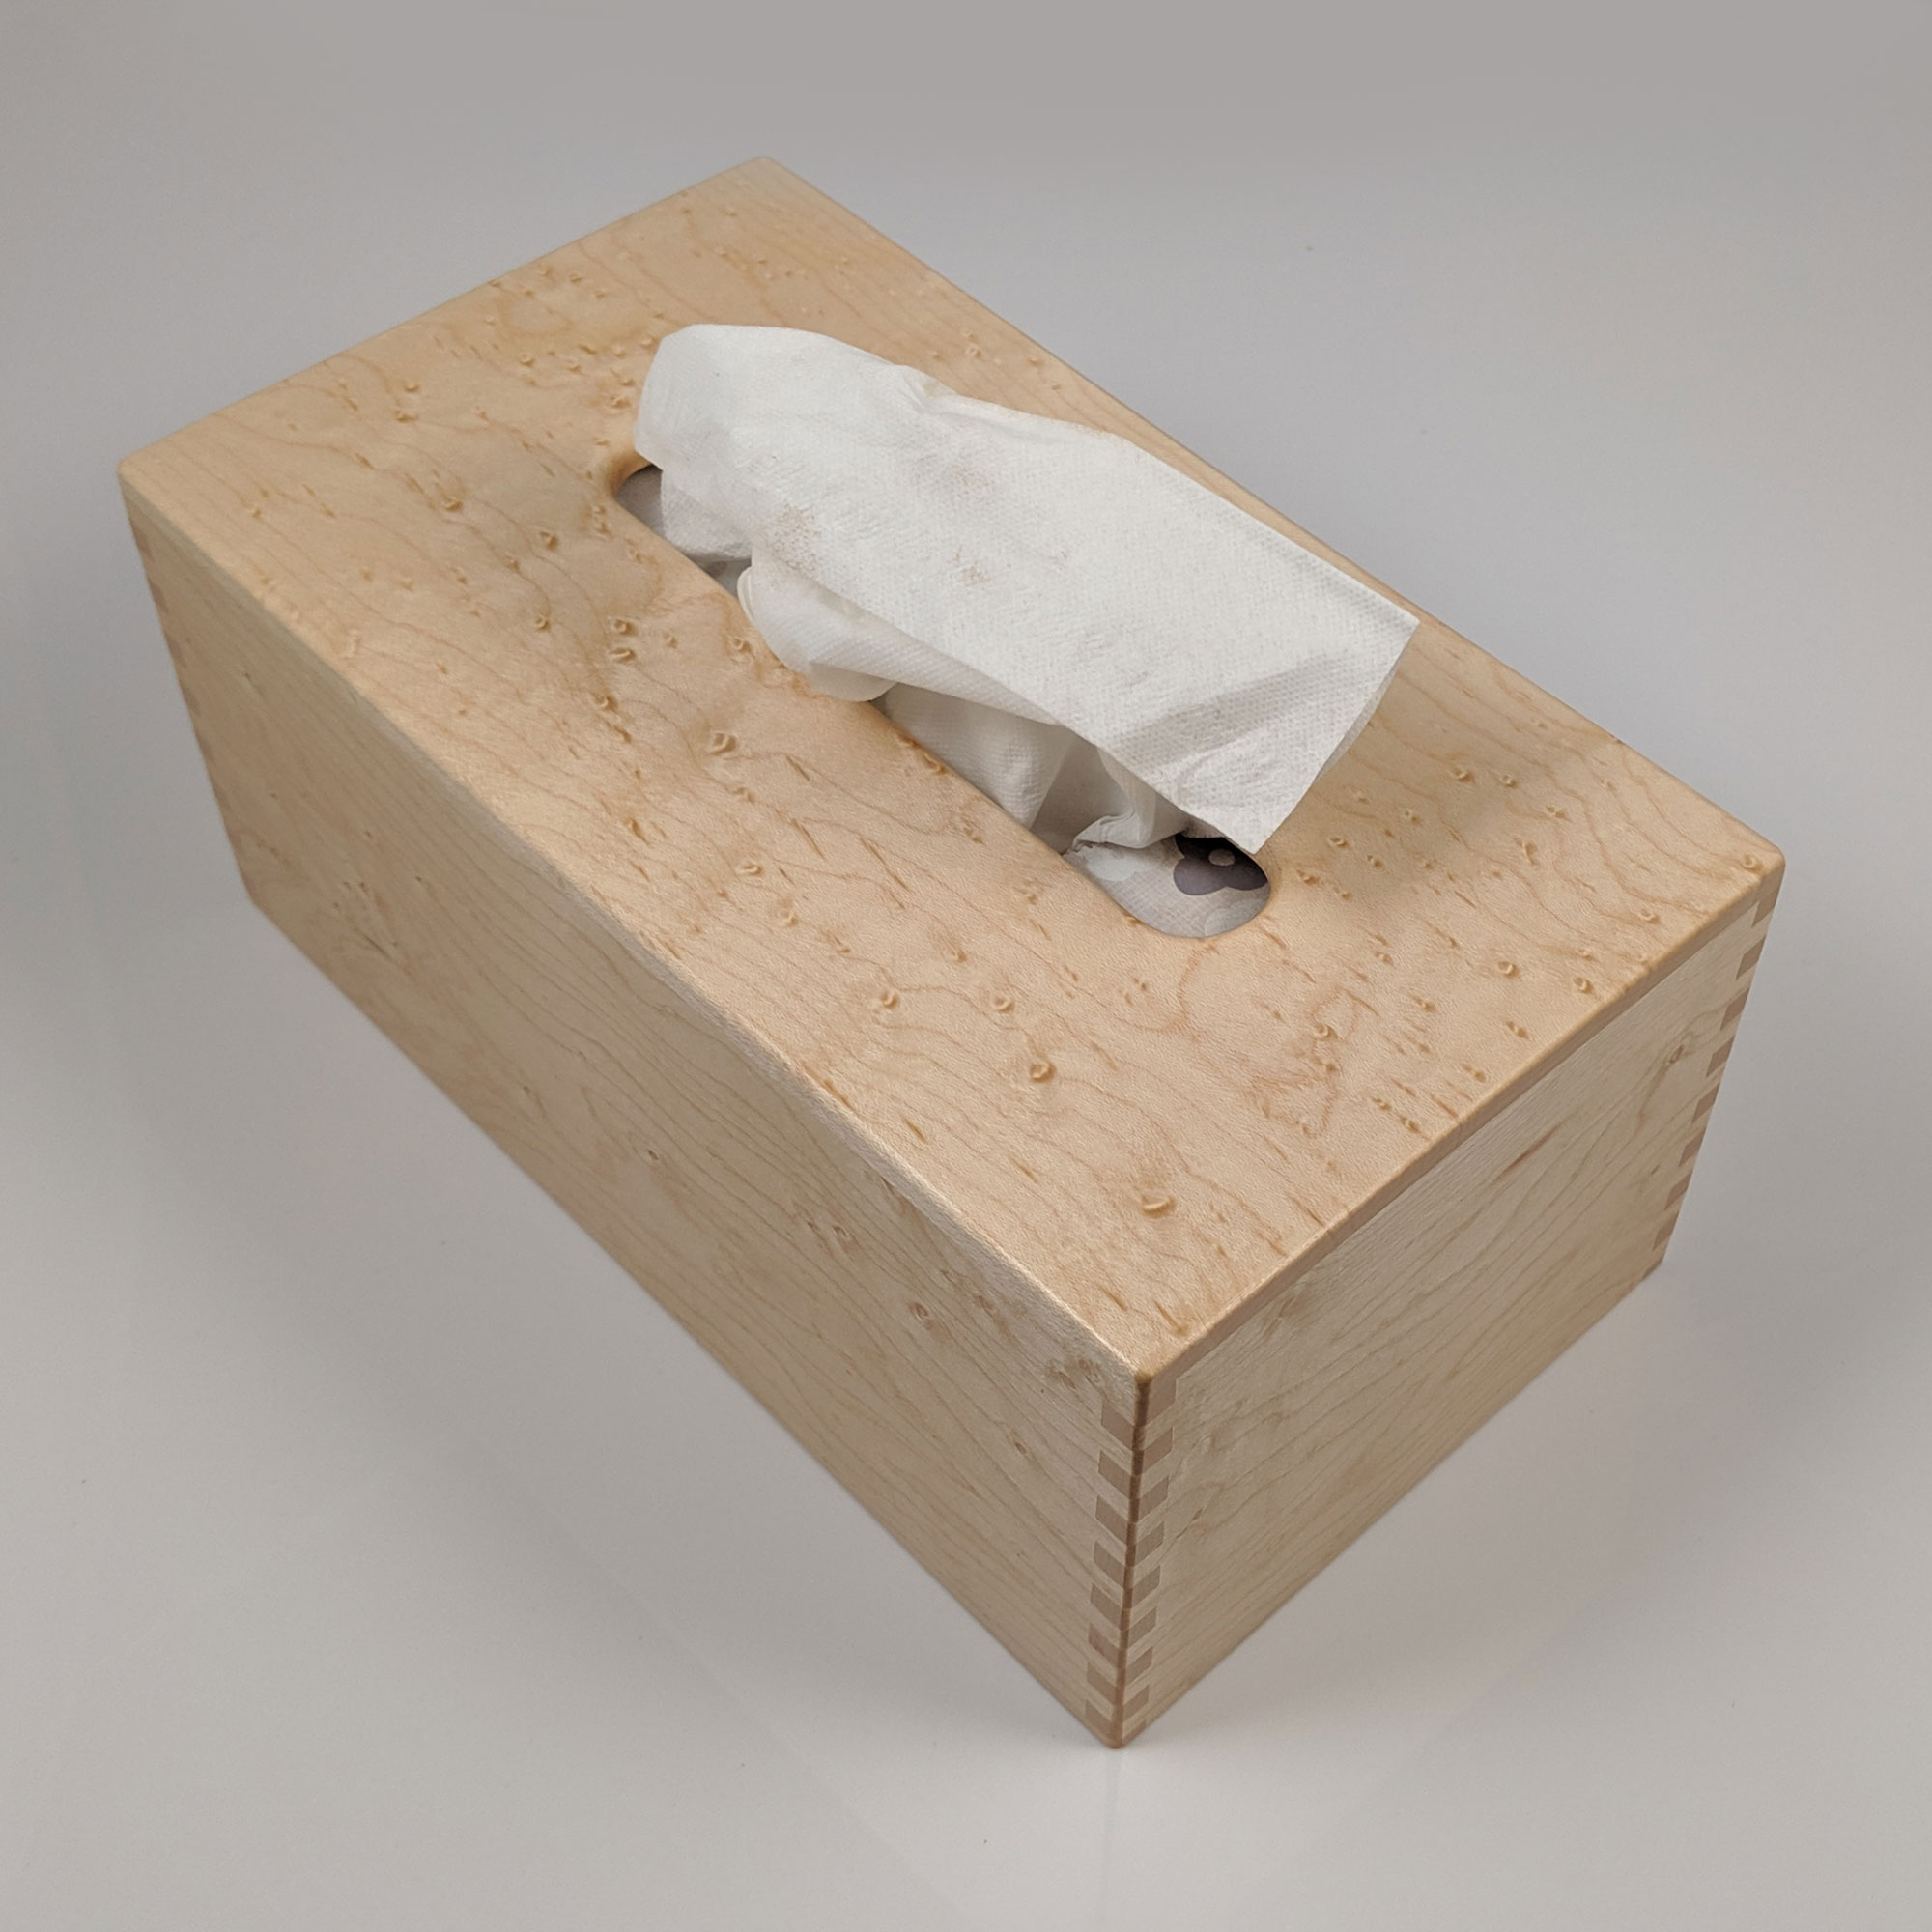 Tissue Box Cover Cube Square Size Boutique in Birdseye Maple Wood Veneer. 